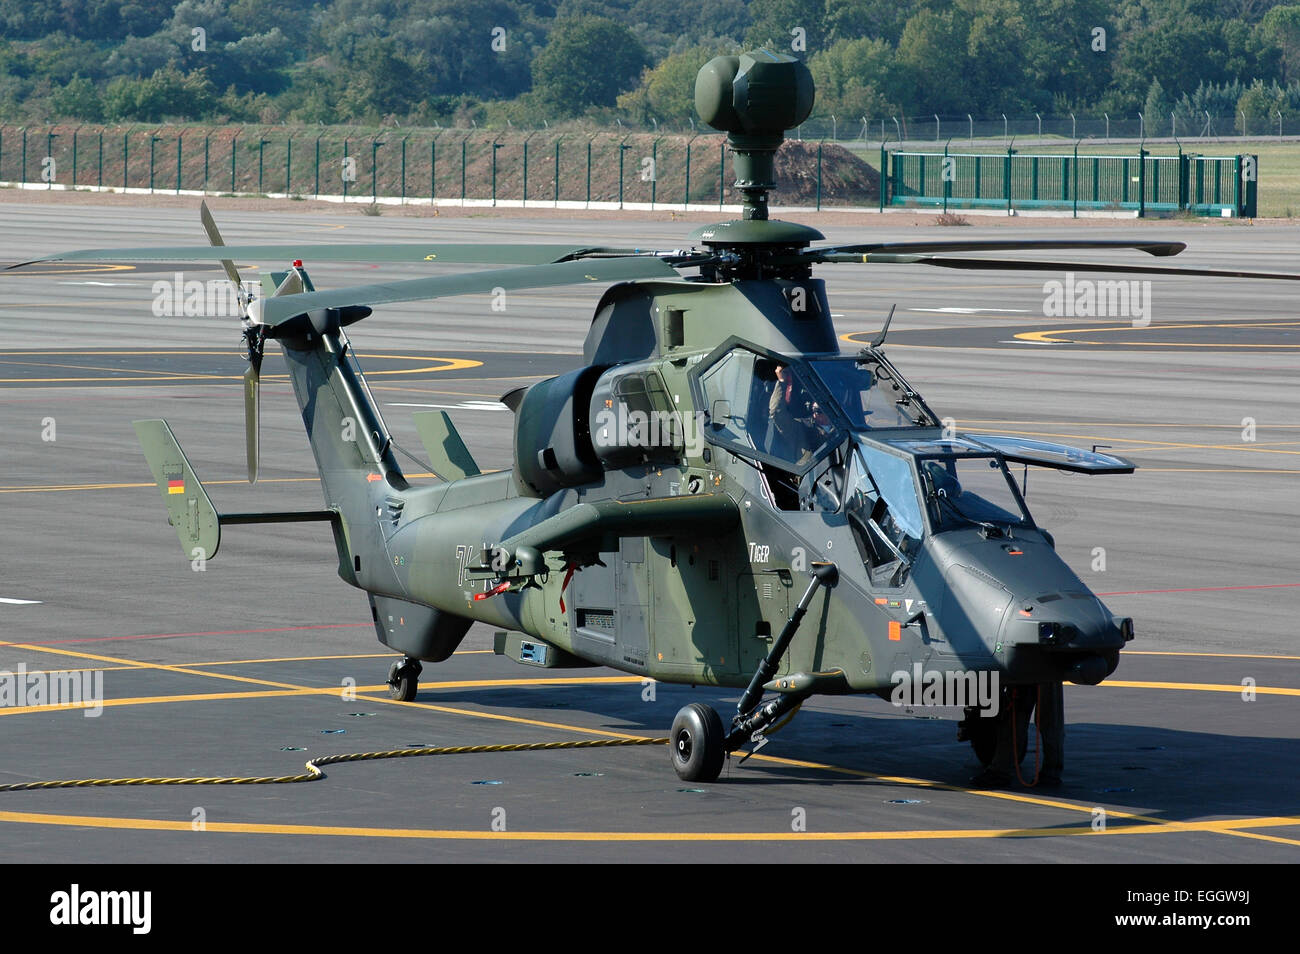 A Eurocopter Tiger attack helicopter of the German Army taken on the base at Le Luc, France. Stock Photo